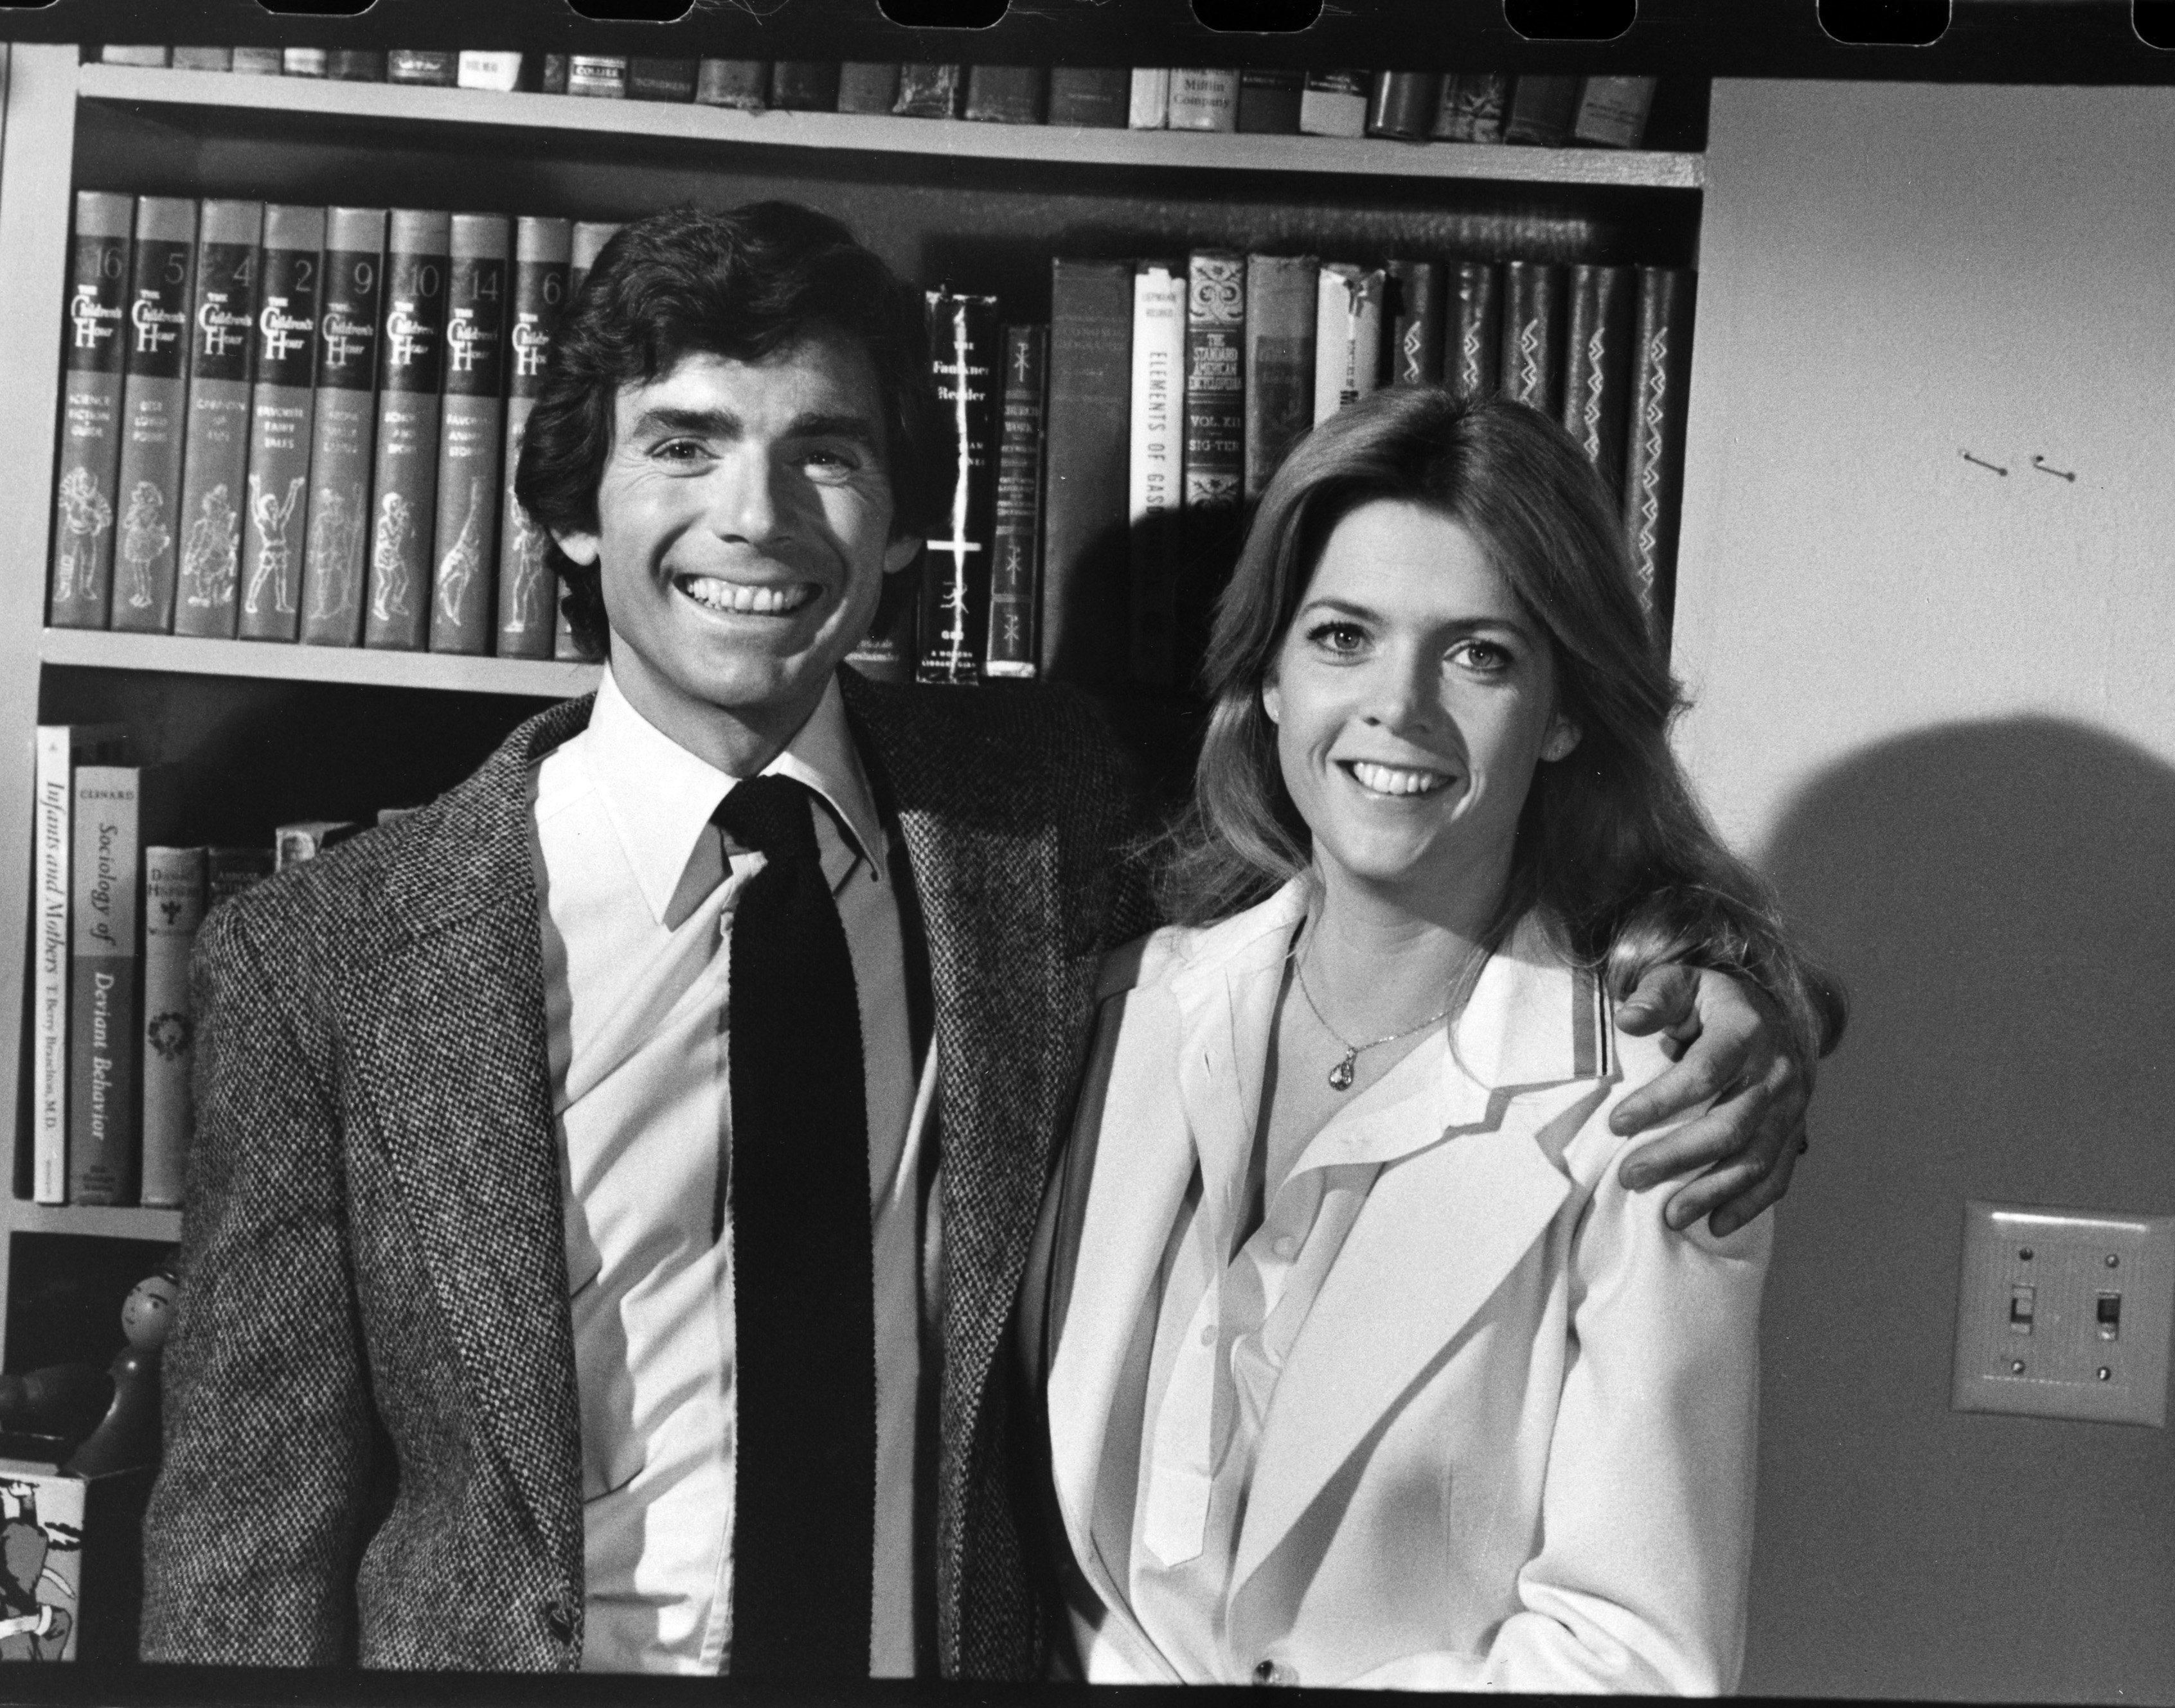 Photo of Meredith Baxter and David Birney on January 25, 1979 | Source: Getty Images